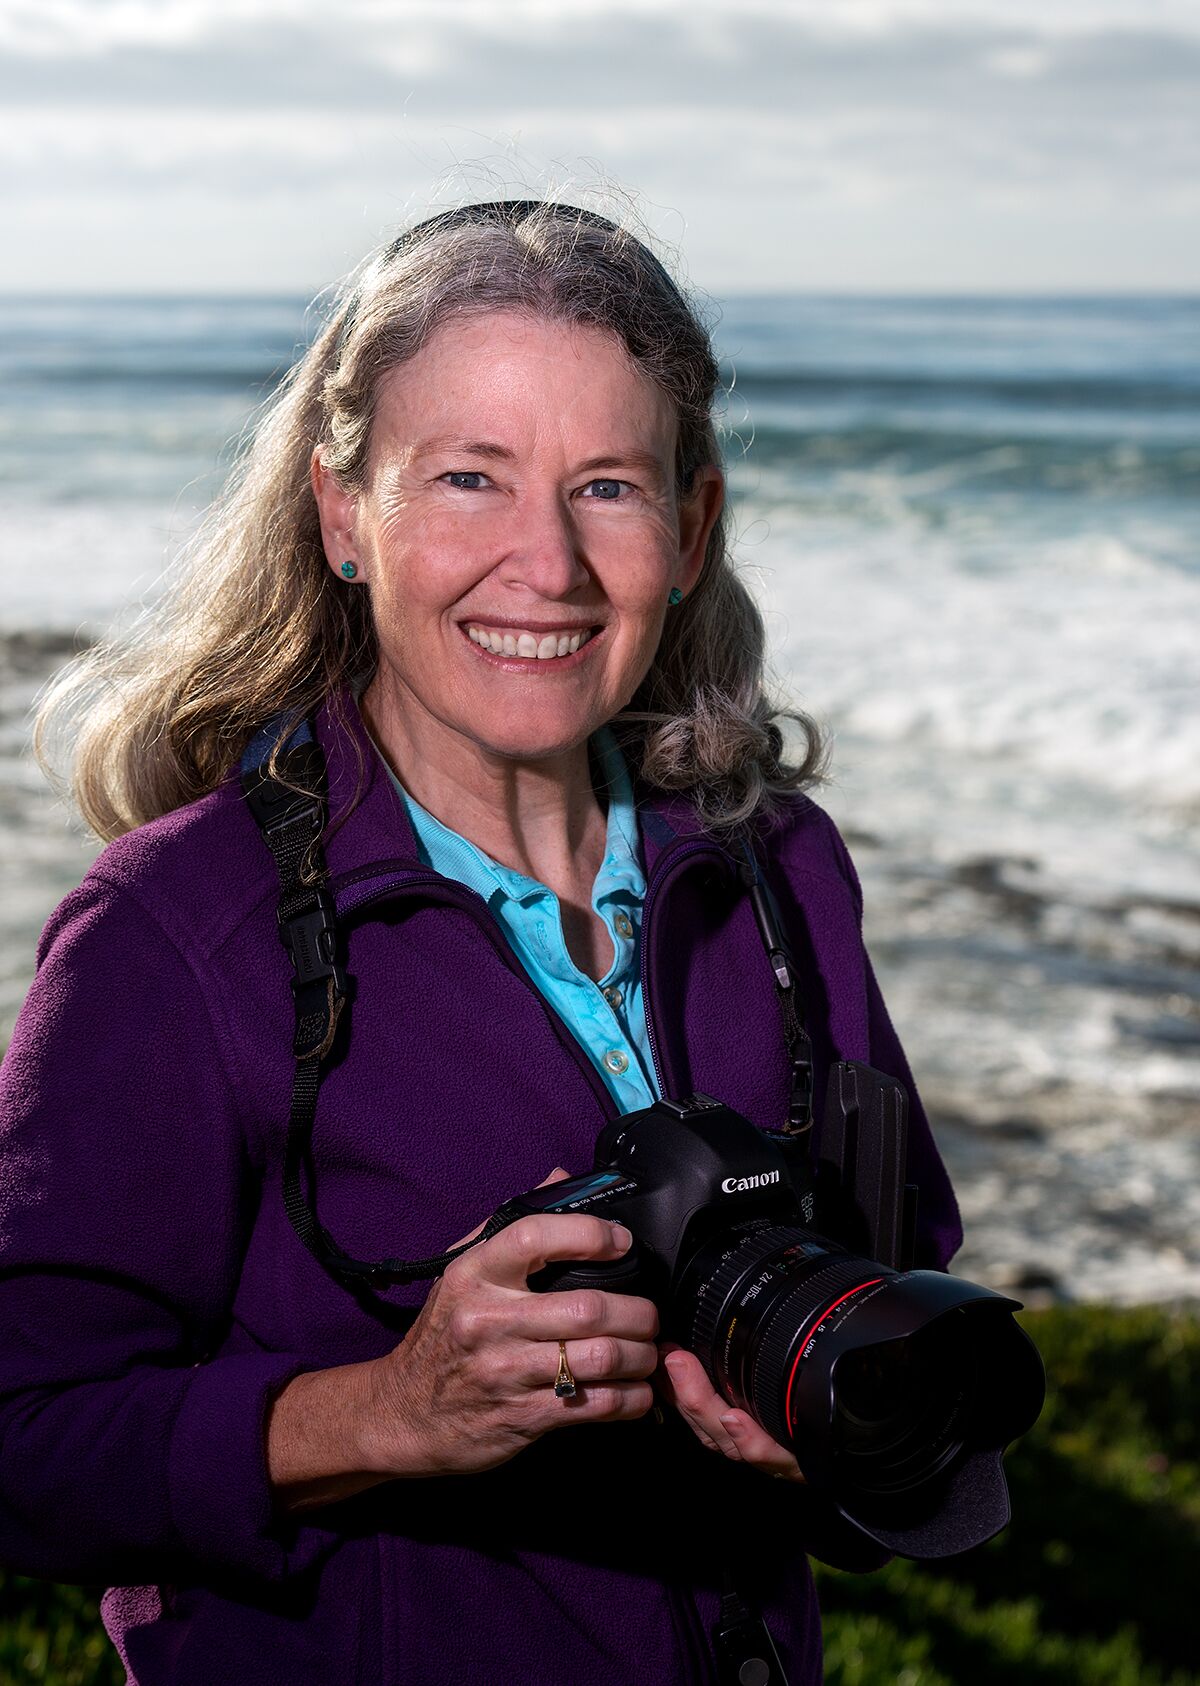 Ann Collins says La Jolla, where she grew up, is "very photogenic."